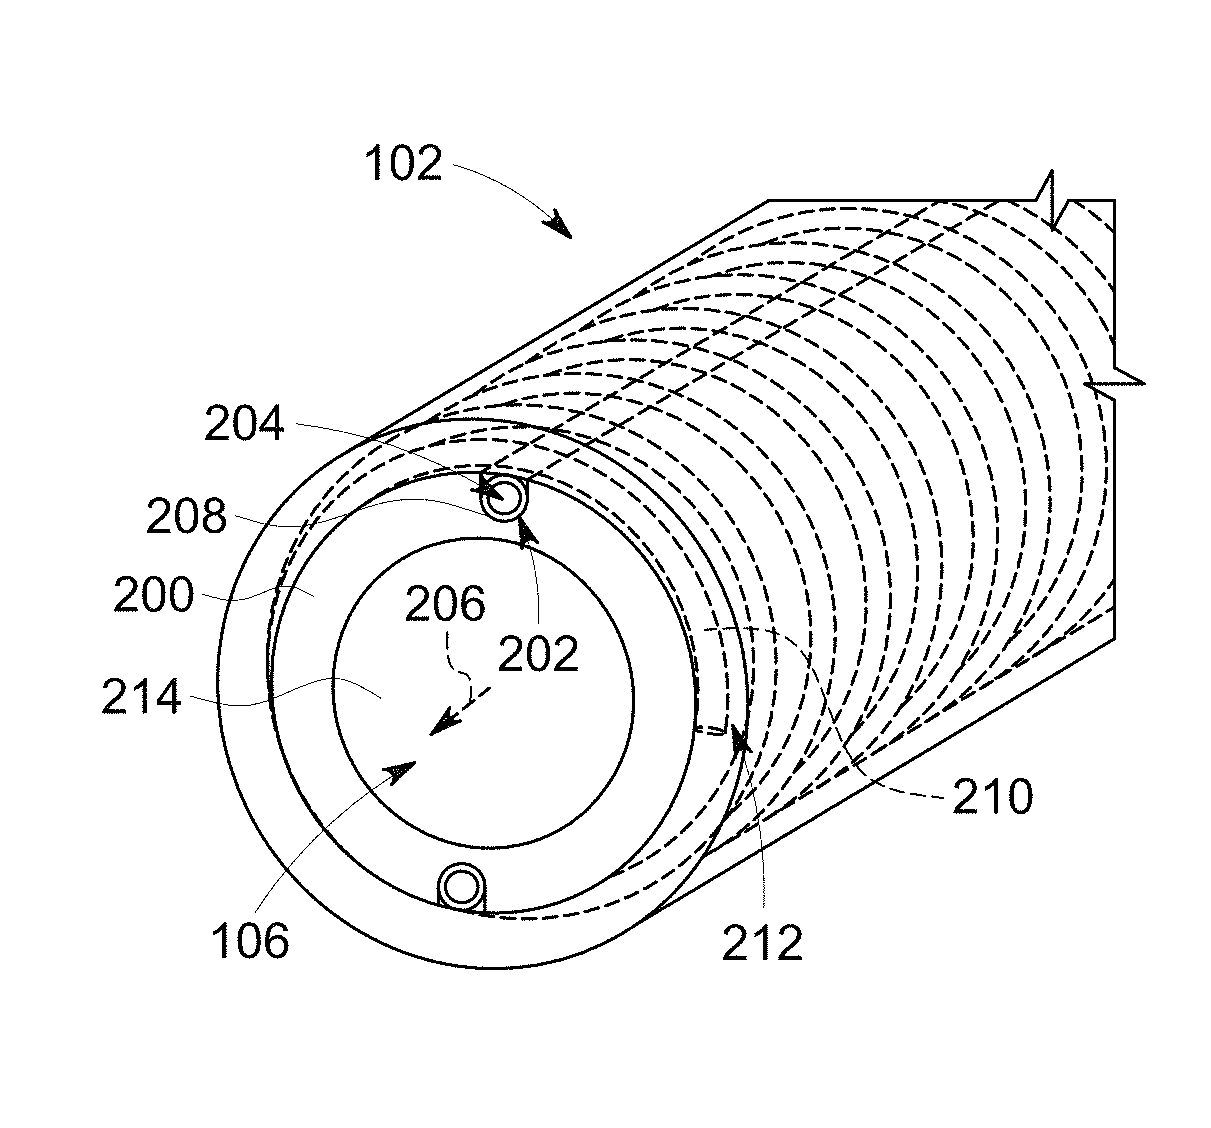 Fluid sensor cable assembly, system, and method